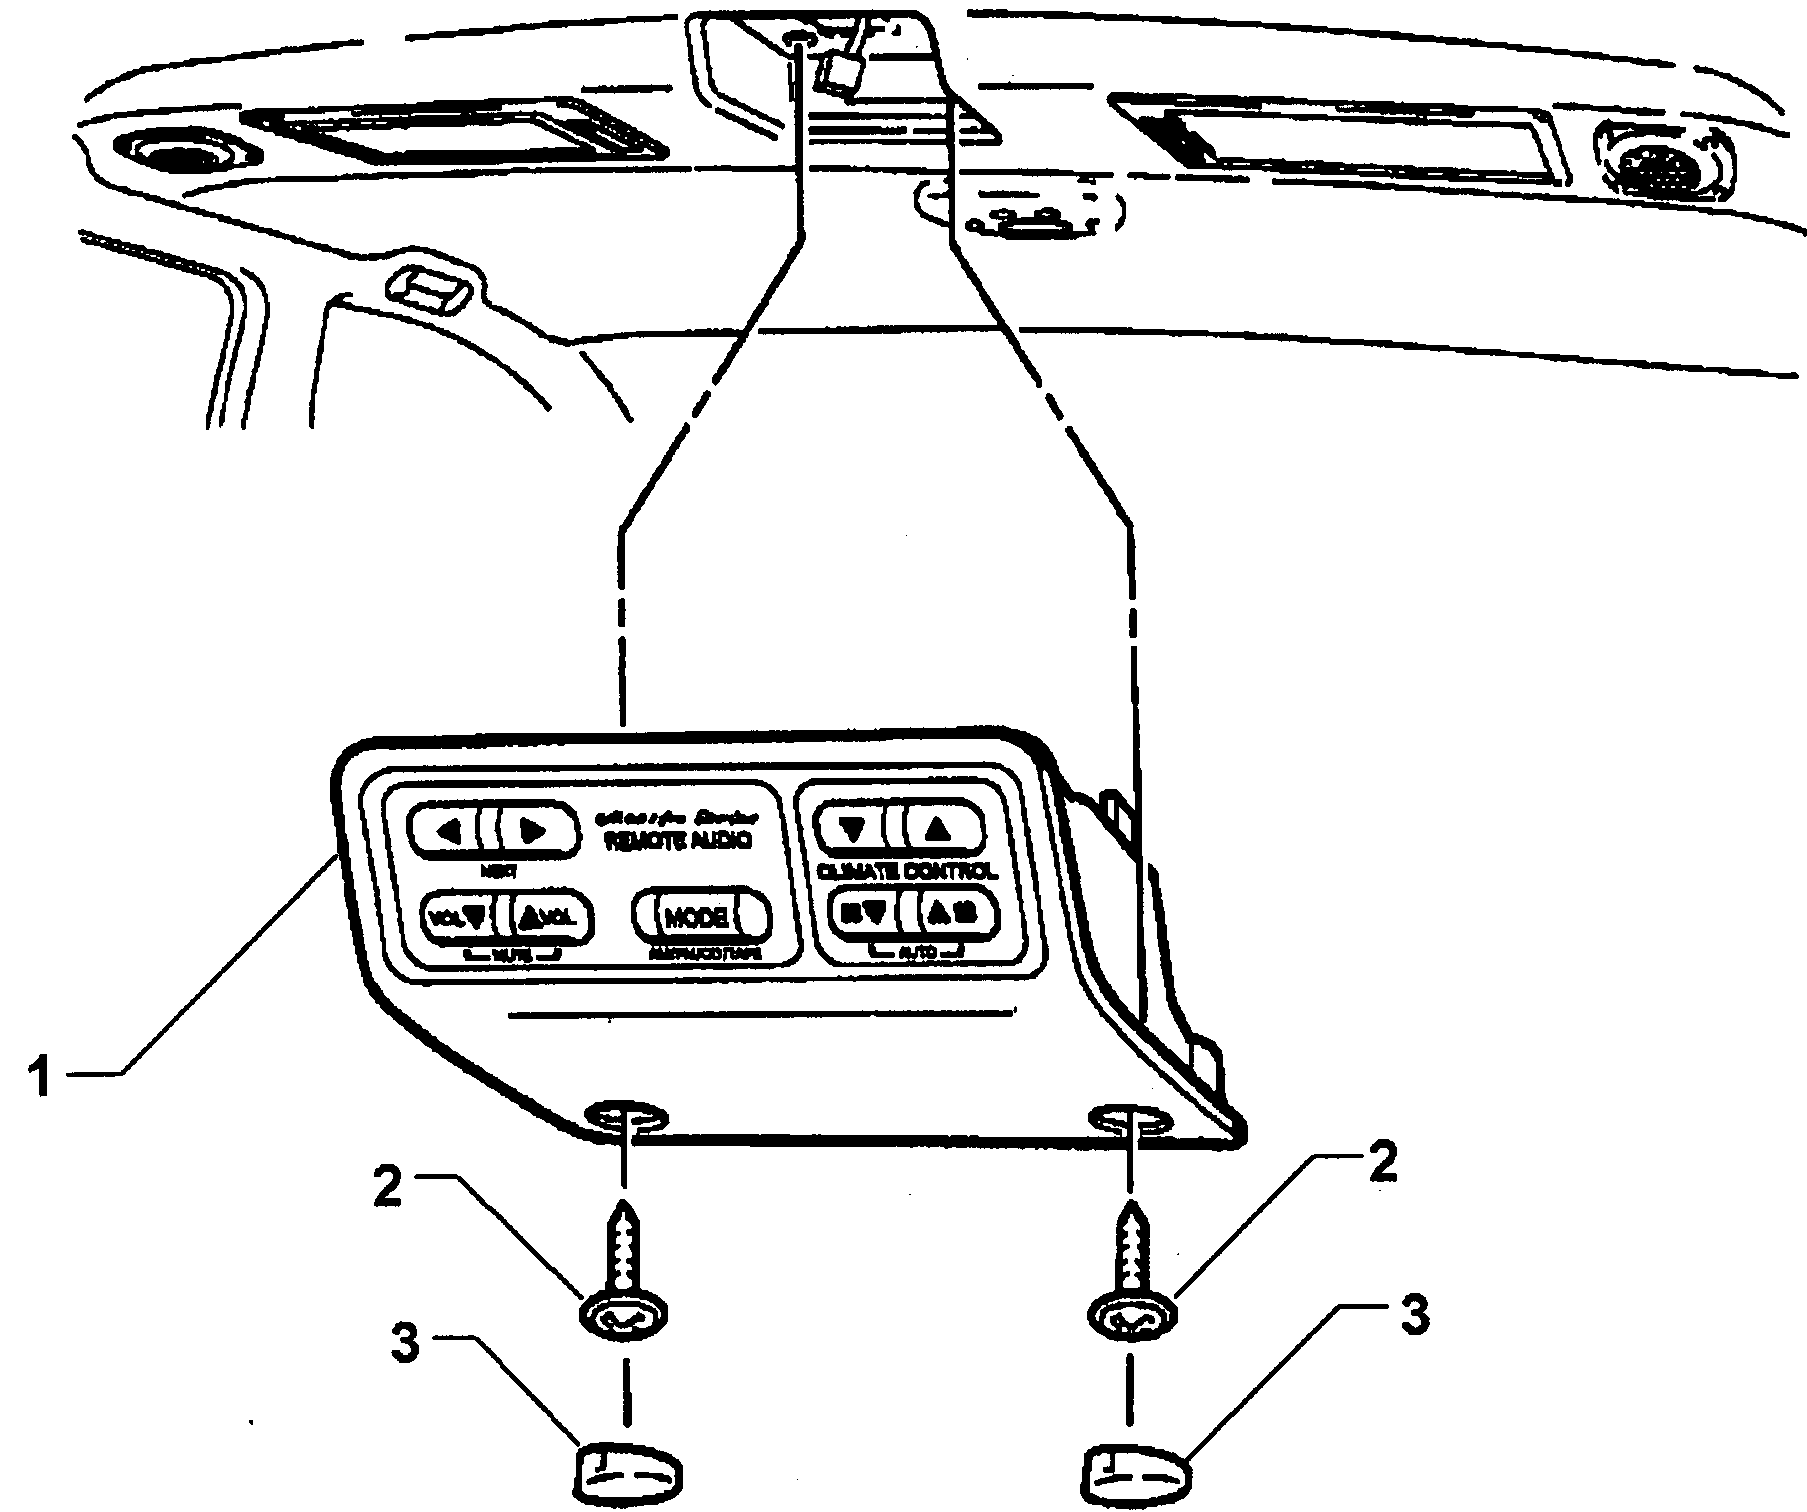 RADIO REMOTE SWITCH - ROOF CONSOLE